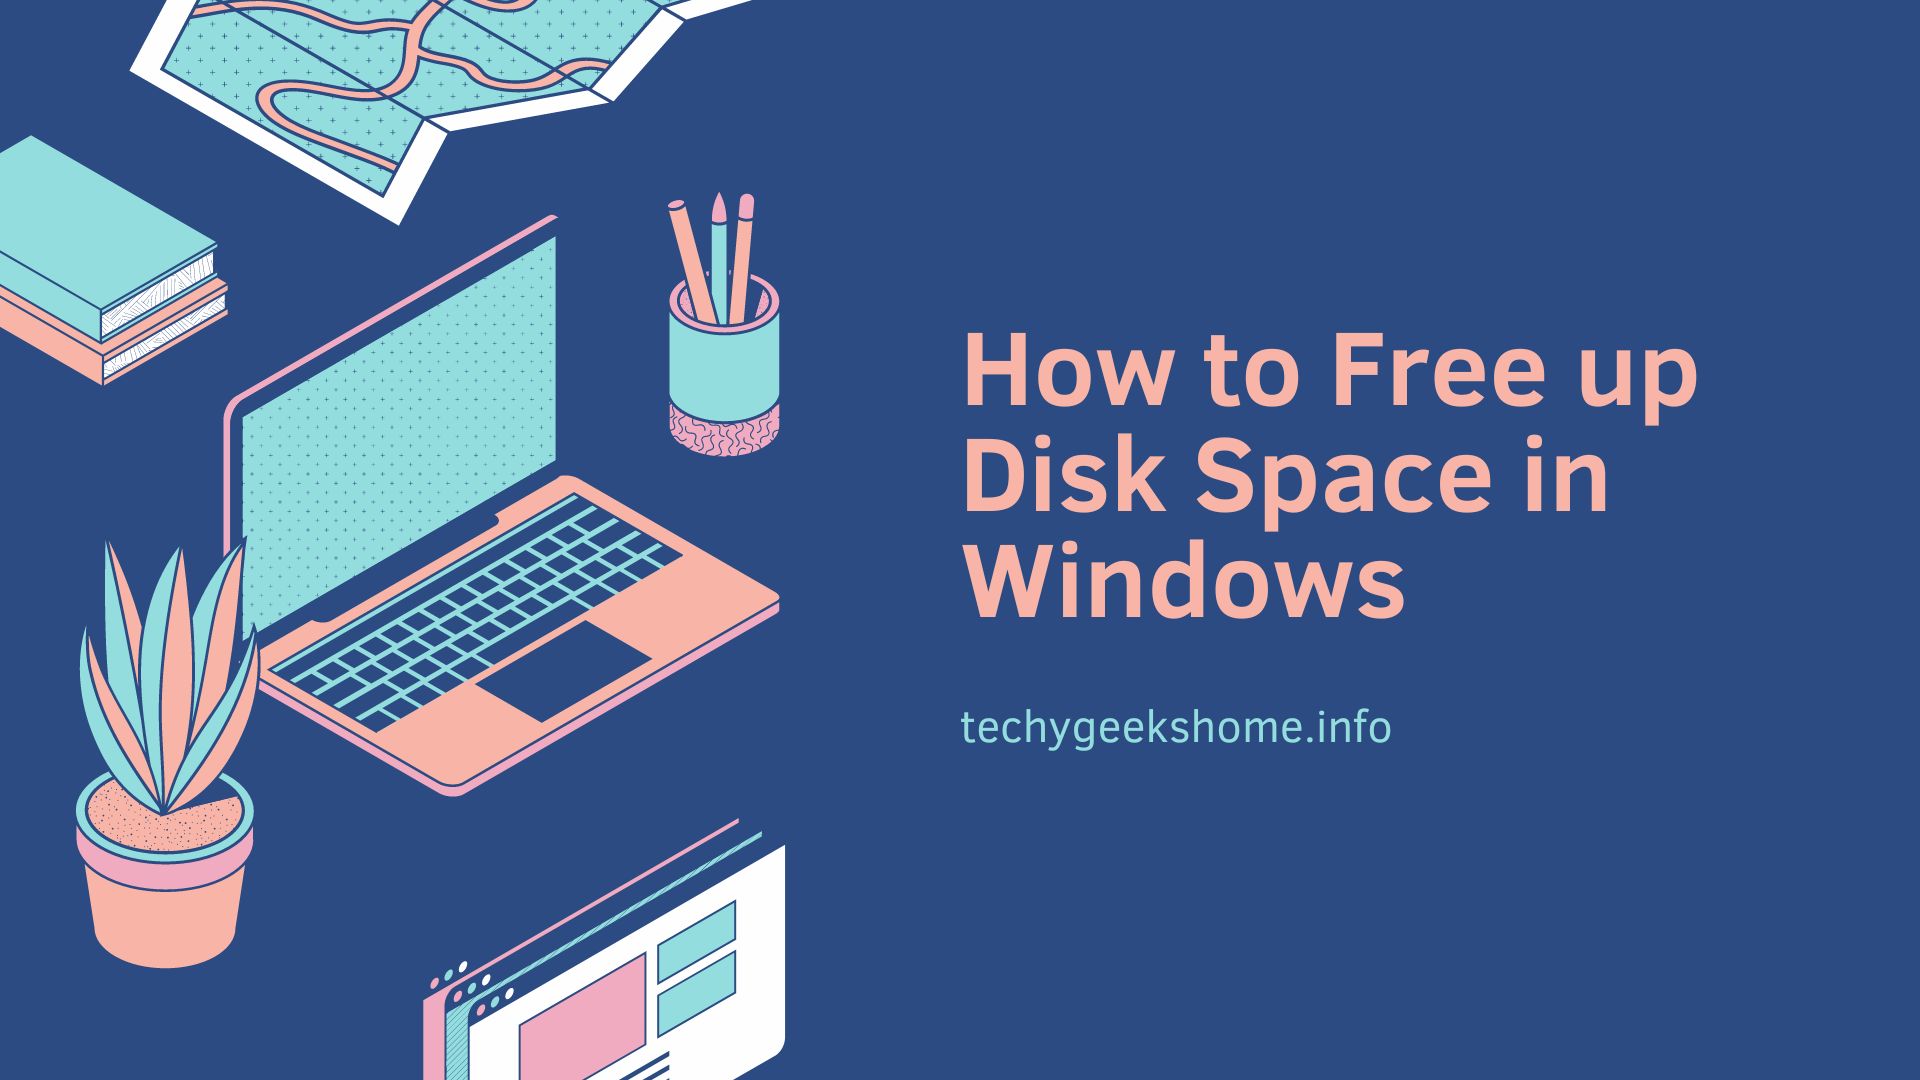 How to Free up Disk Space in Windows